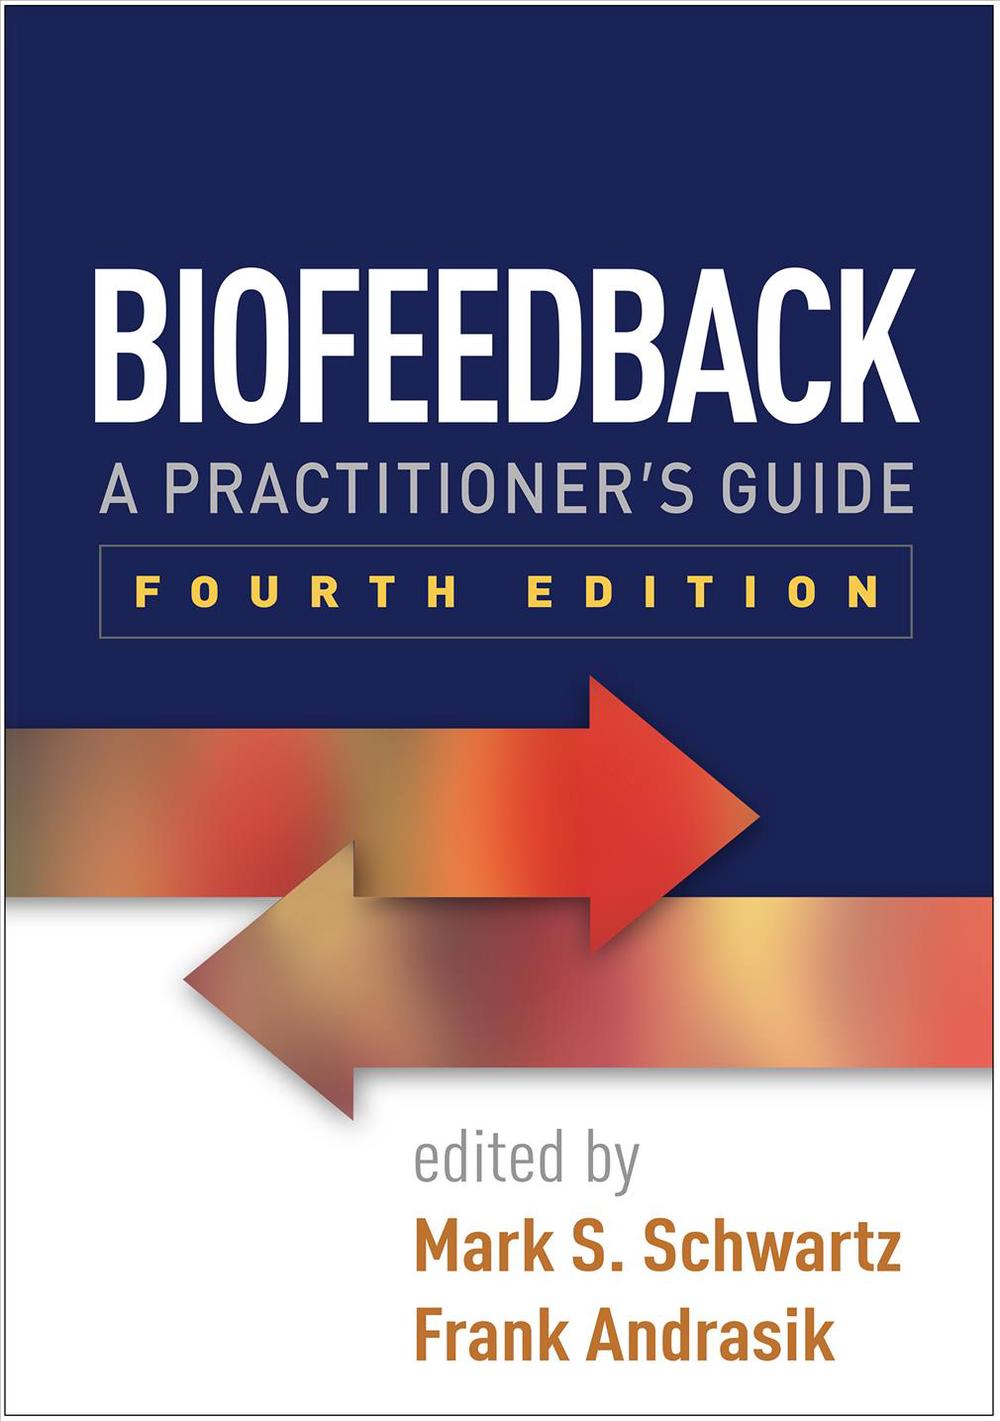 Biofeedback a practitioner's guide, 4th ed.